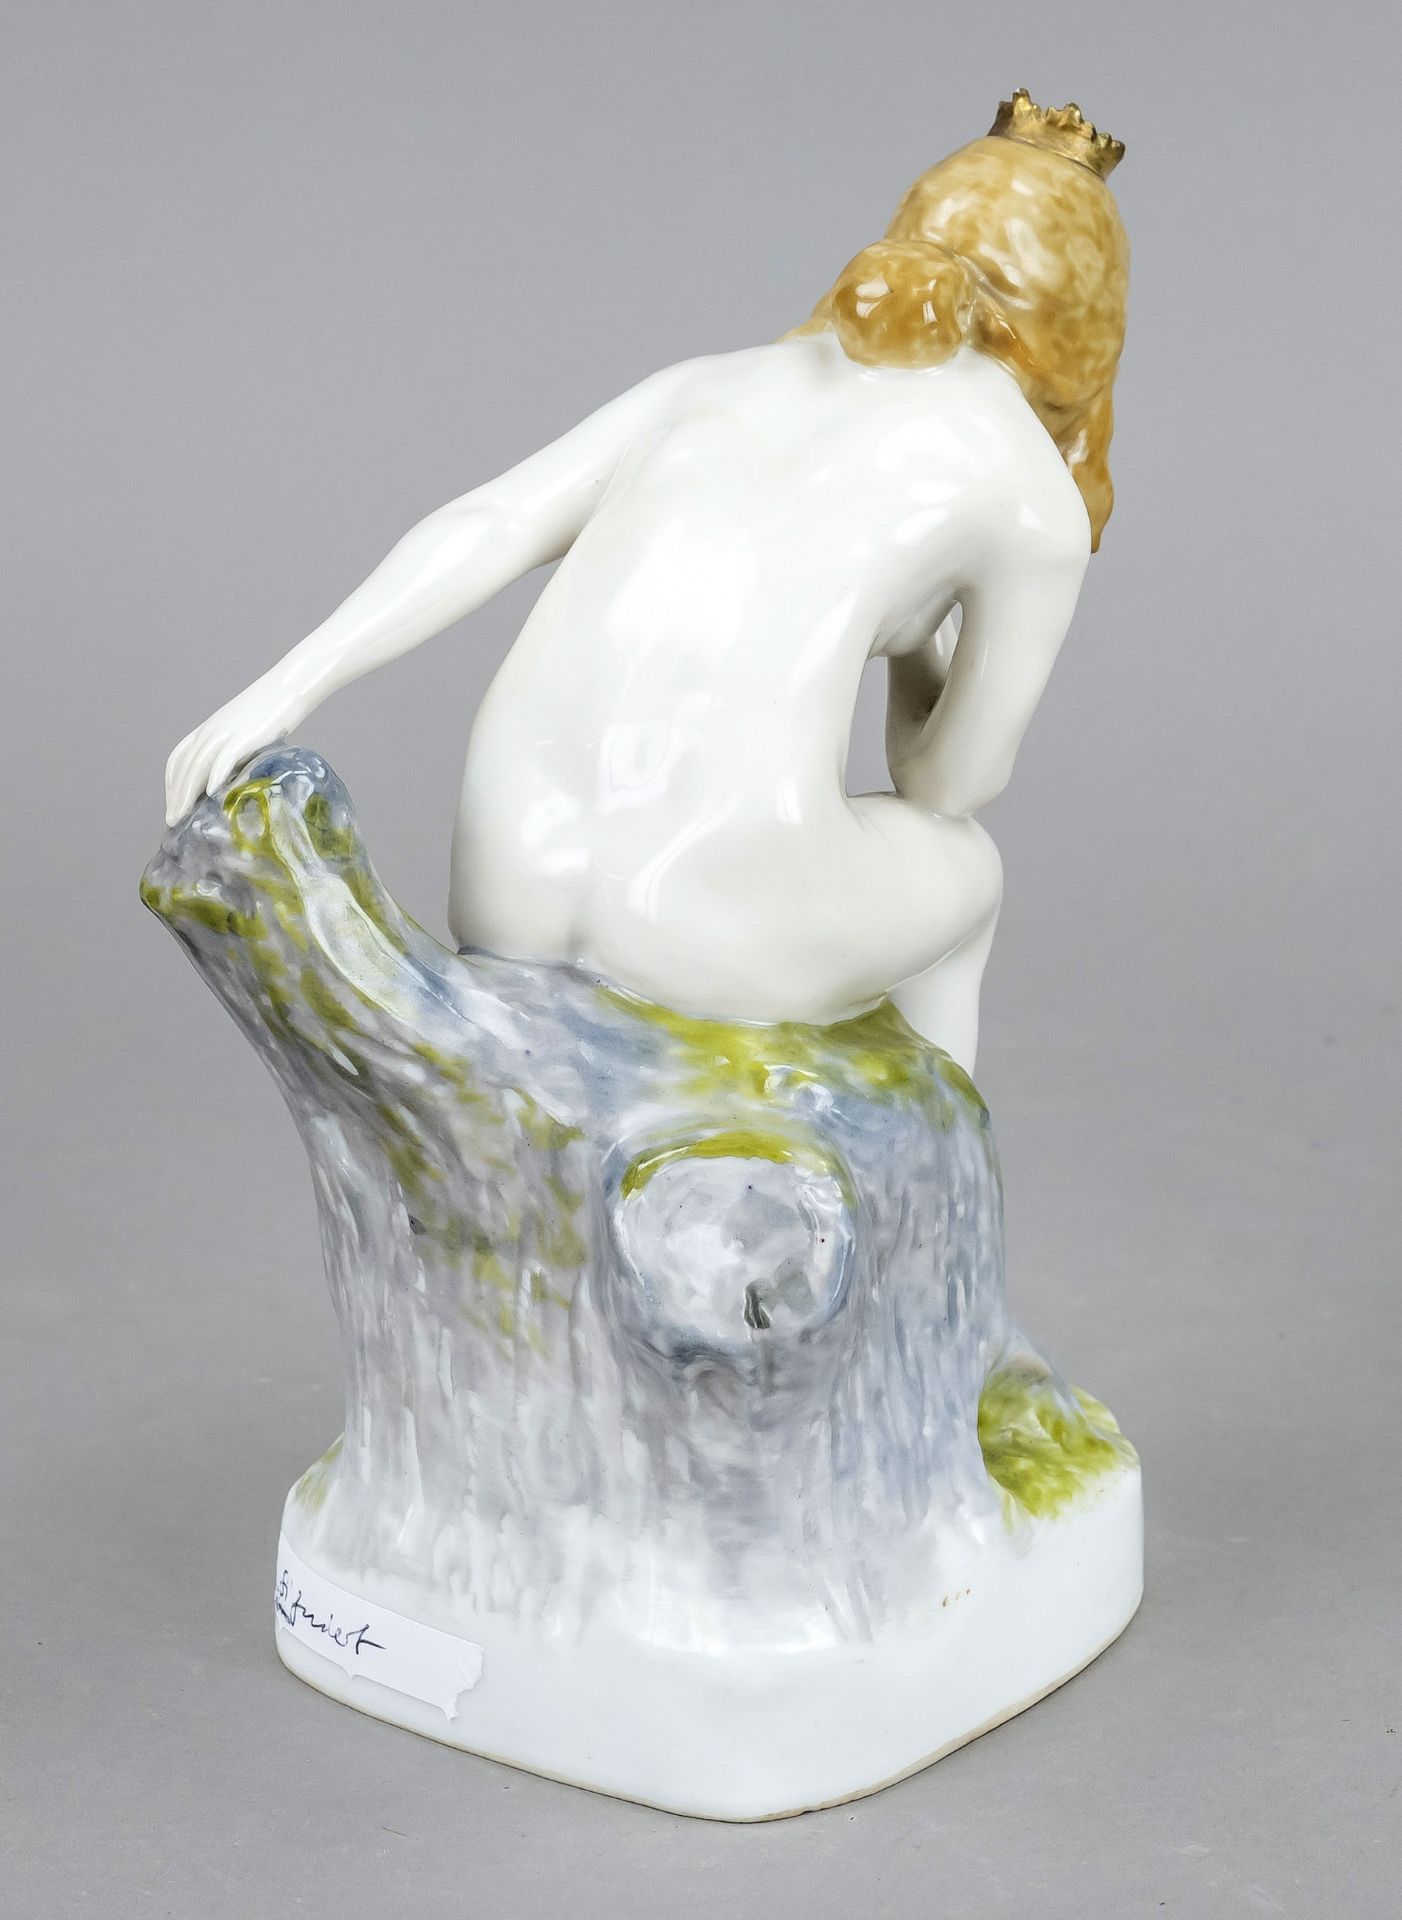 Rare Art Nouveau figure, Karl Ens, Volkstedt, mill mark after 1919, naked princess, sitting on a - Image 2 of 2